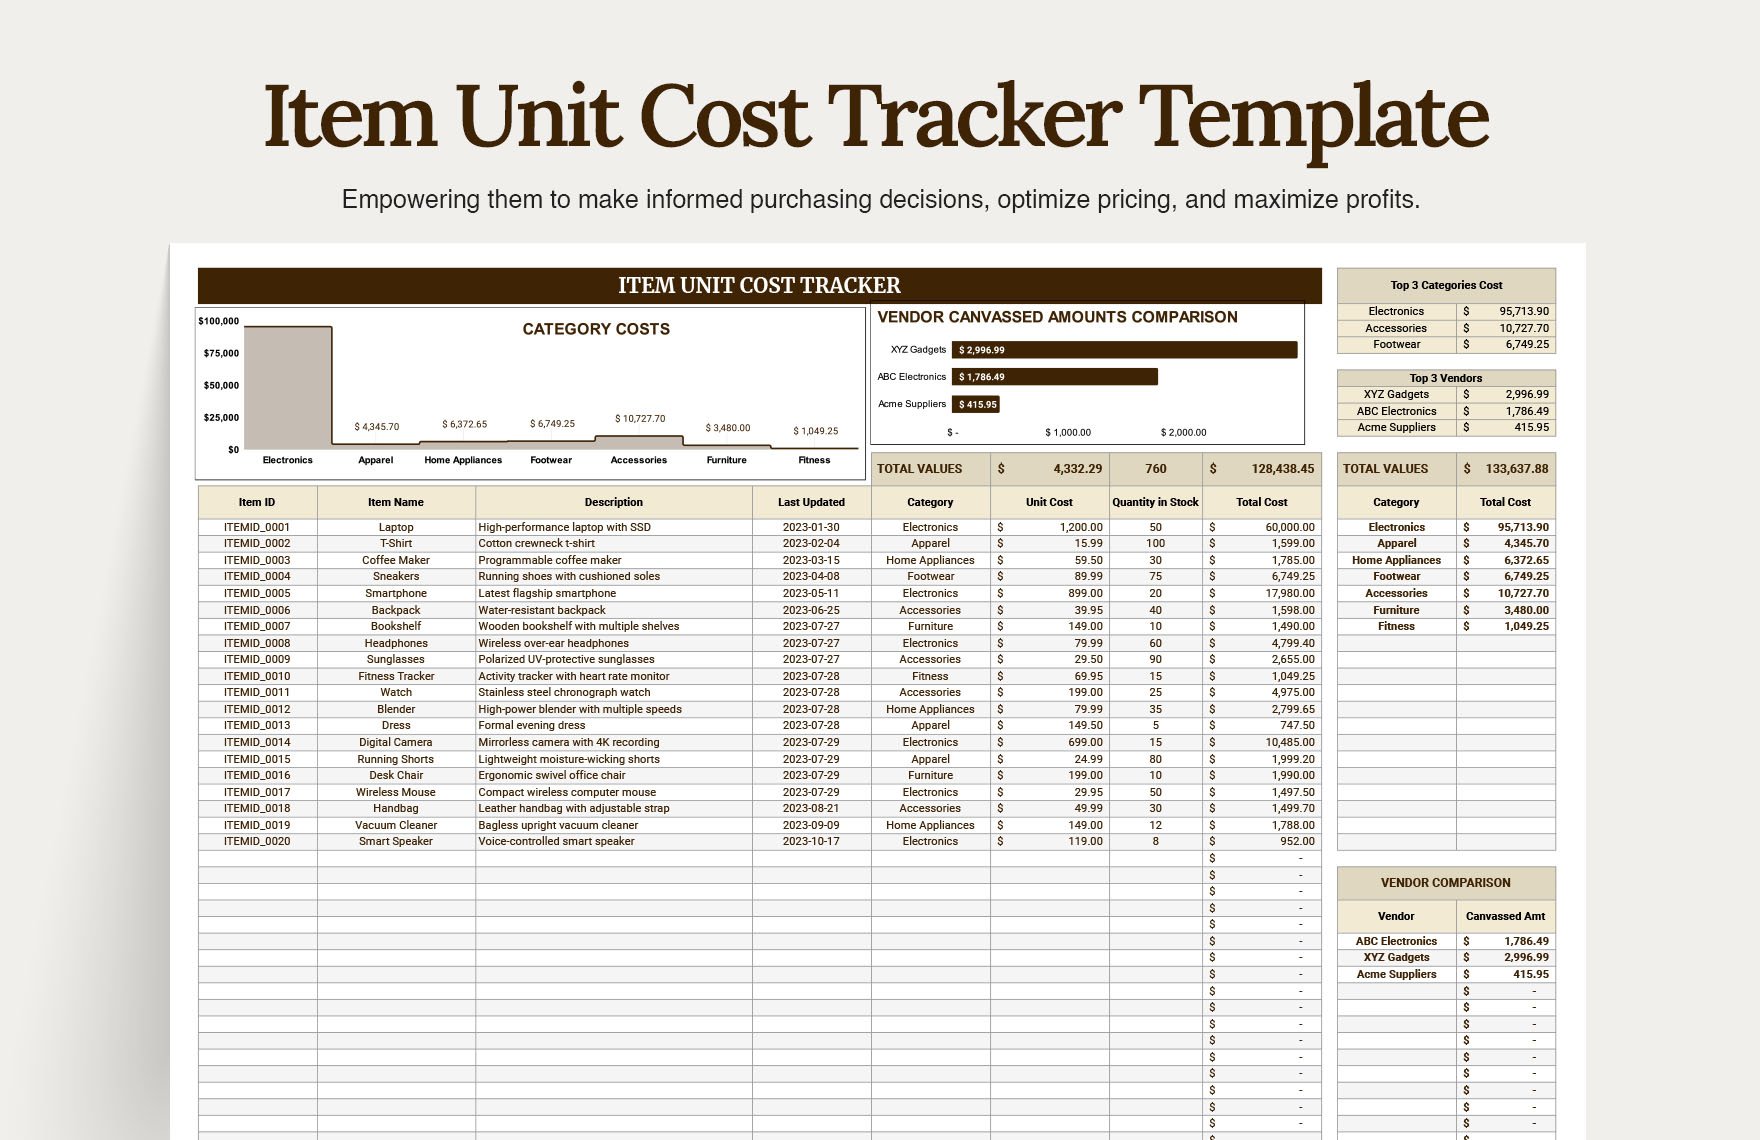 Item Unit Cost Tracker Template in Excel, Google Sheets